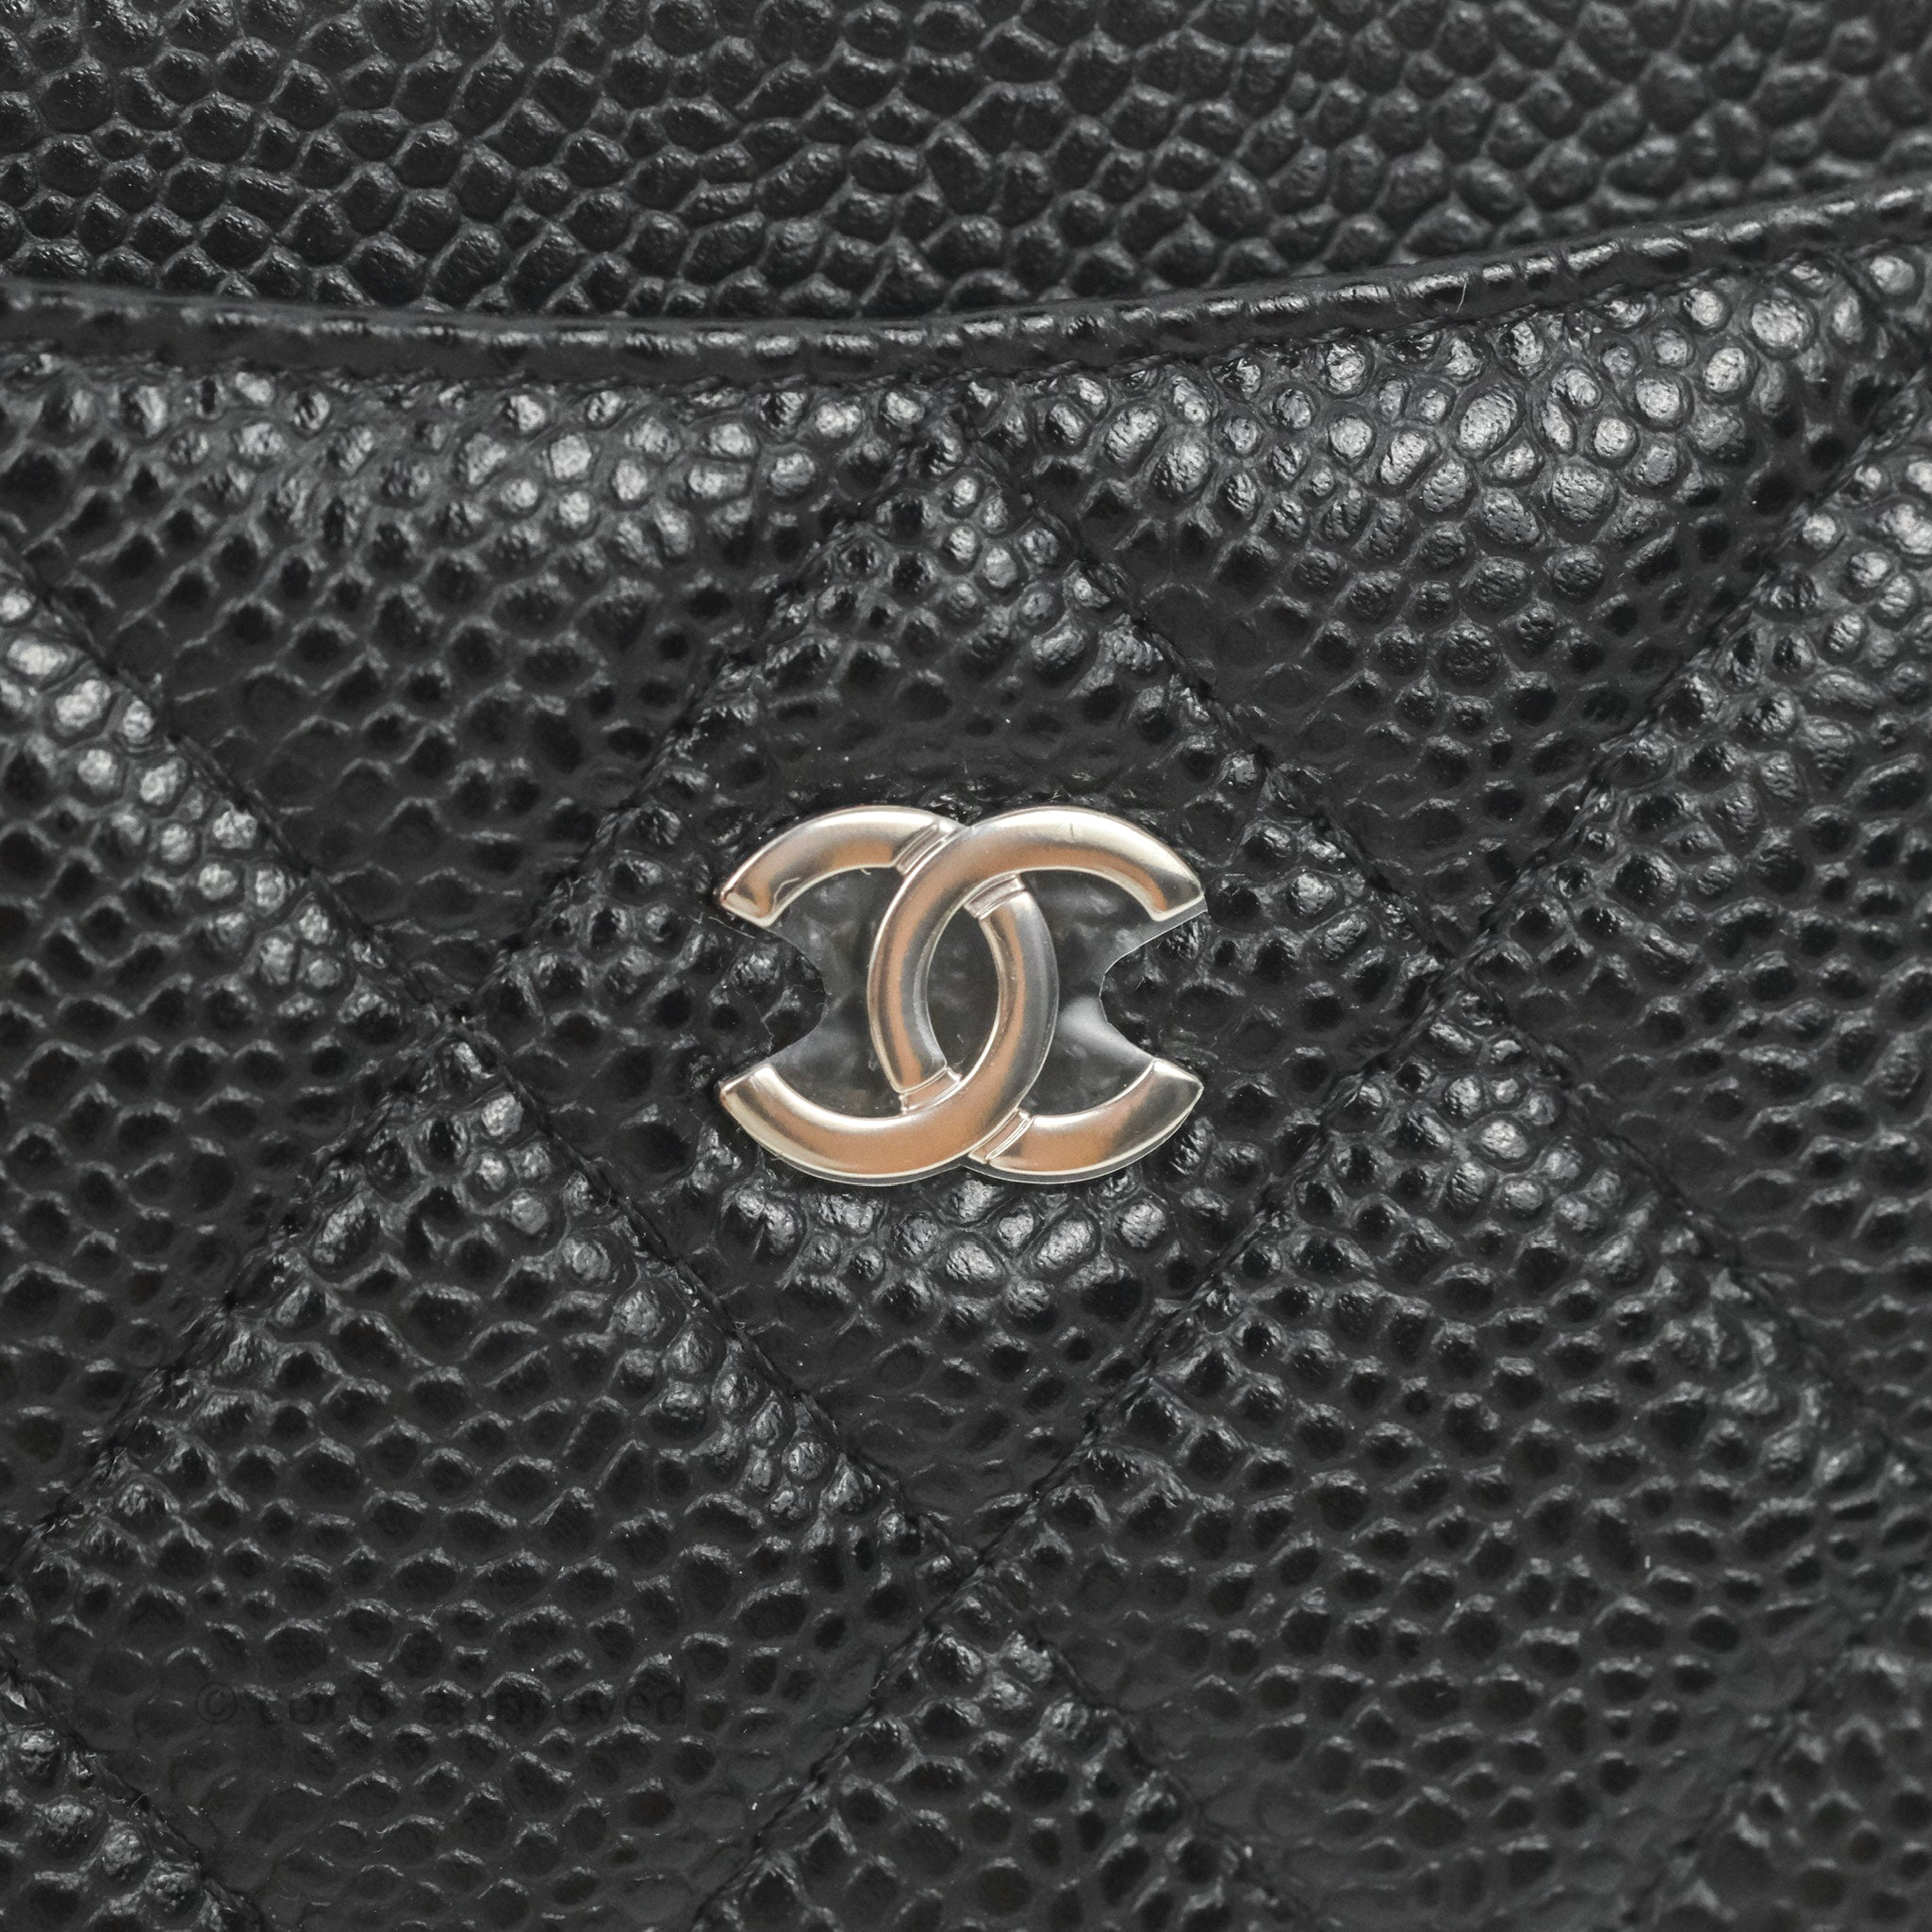 CHANEL Caviar Quilted Flap Card Holder Chain Wristlet Black 664359